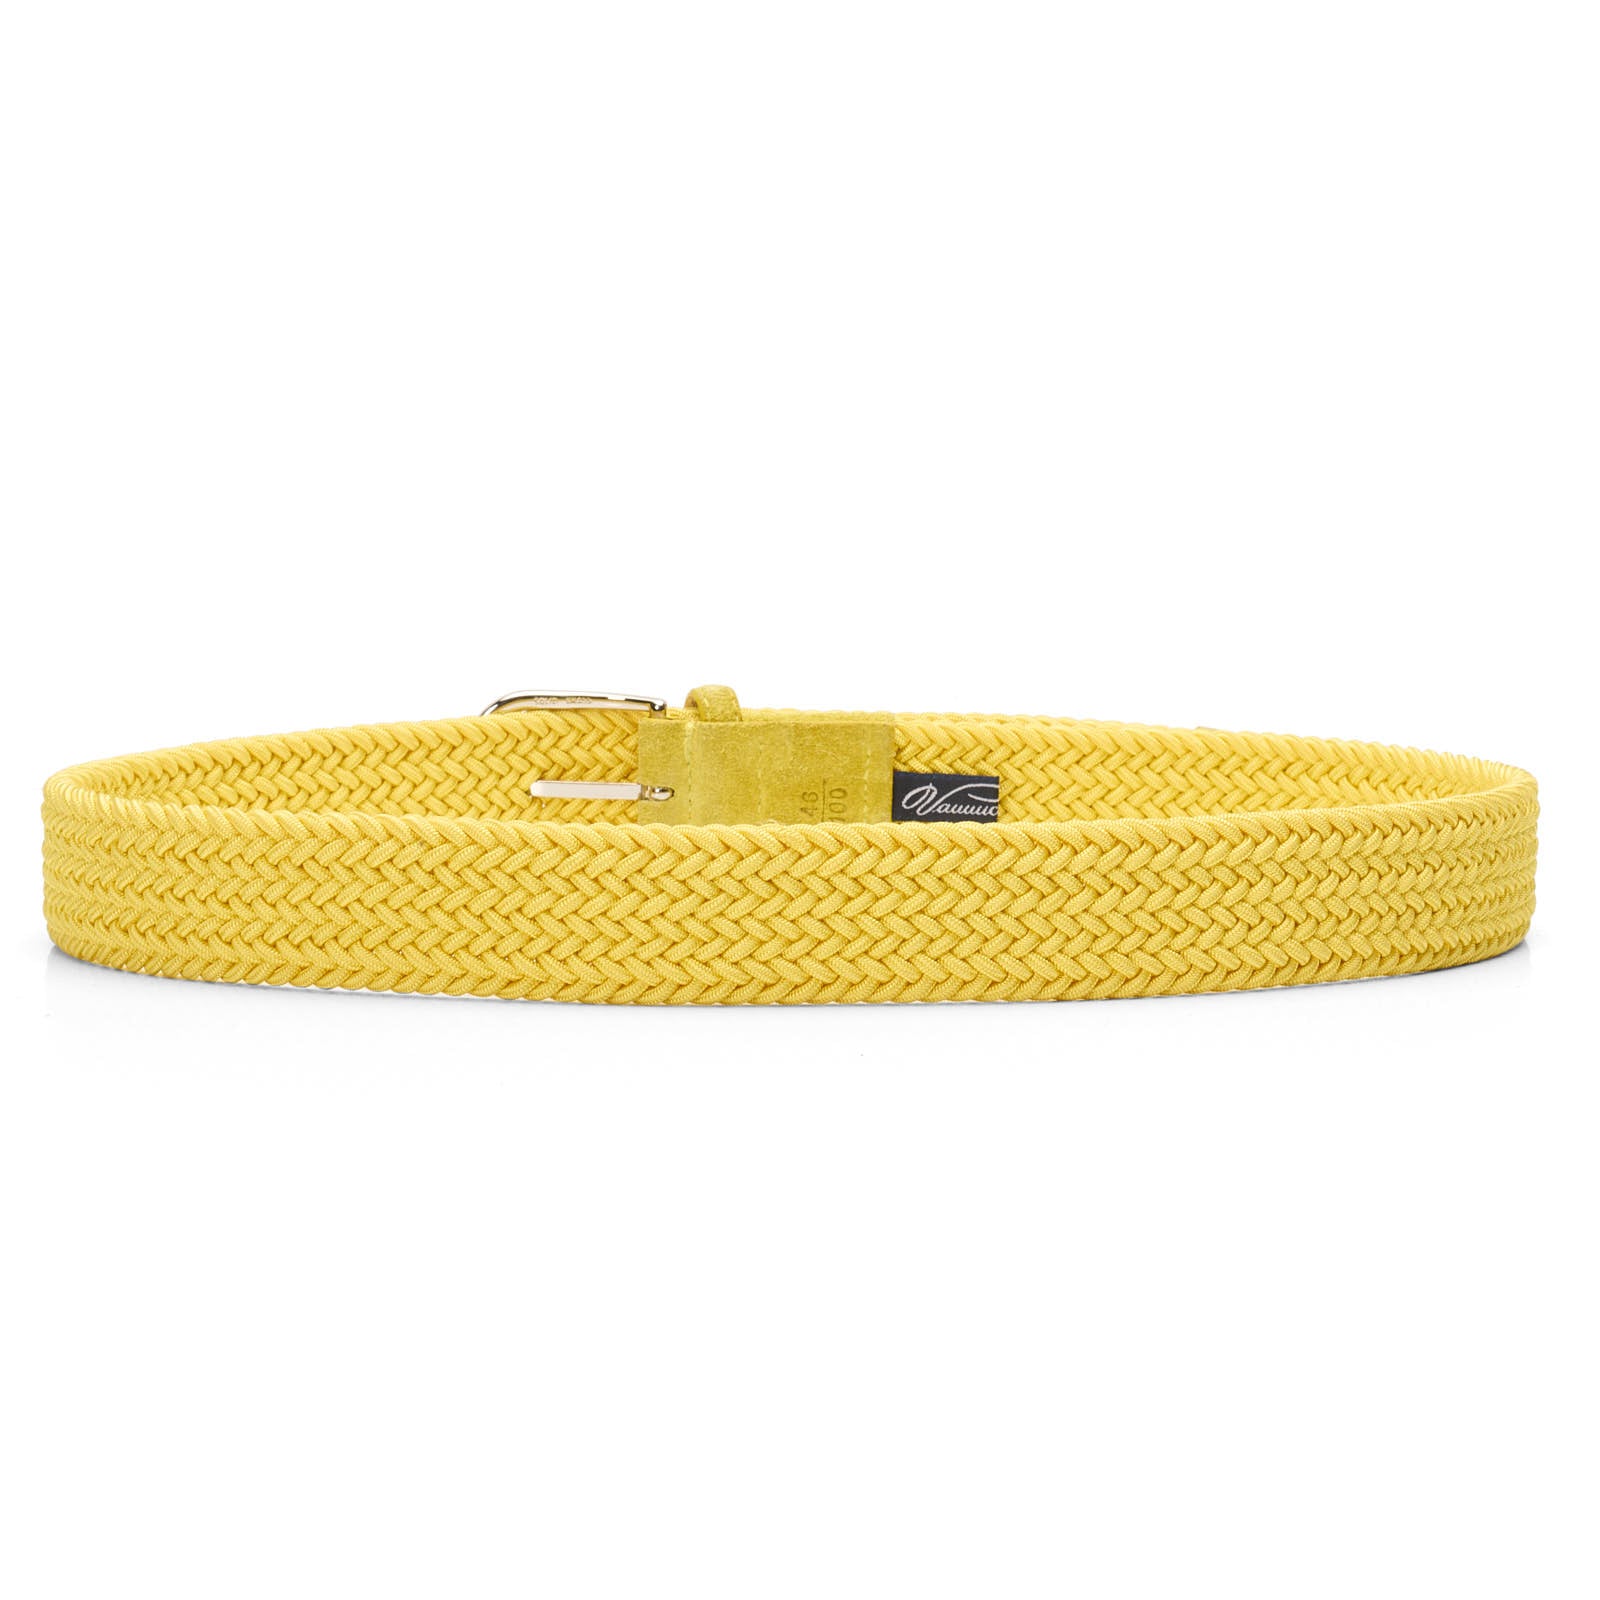 VANNUCCI Milano Yellow Stretch Woven Braided Belt 100cm NEW 46"